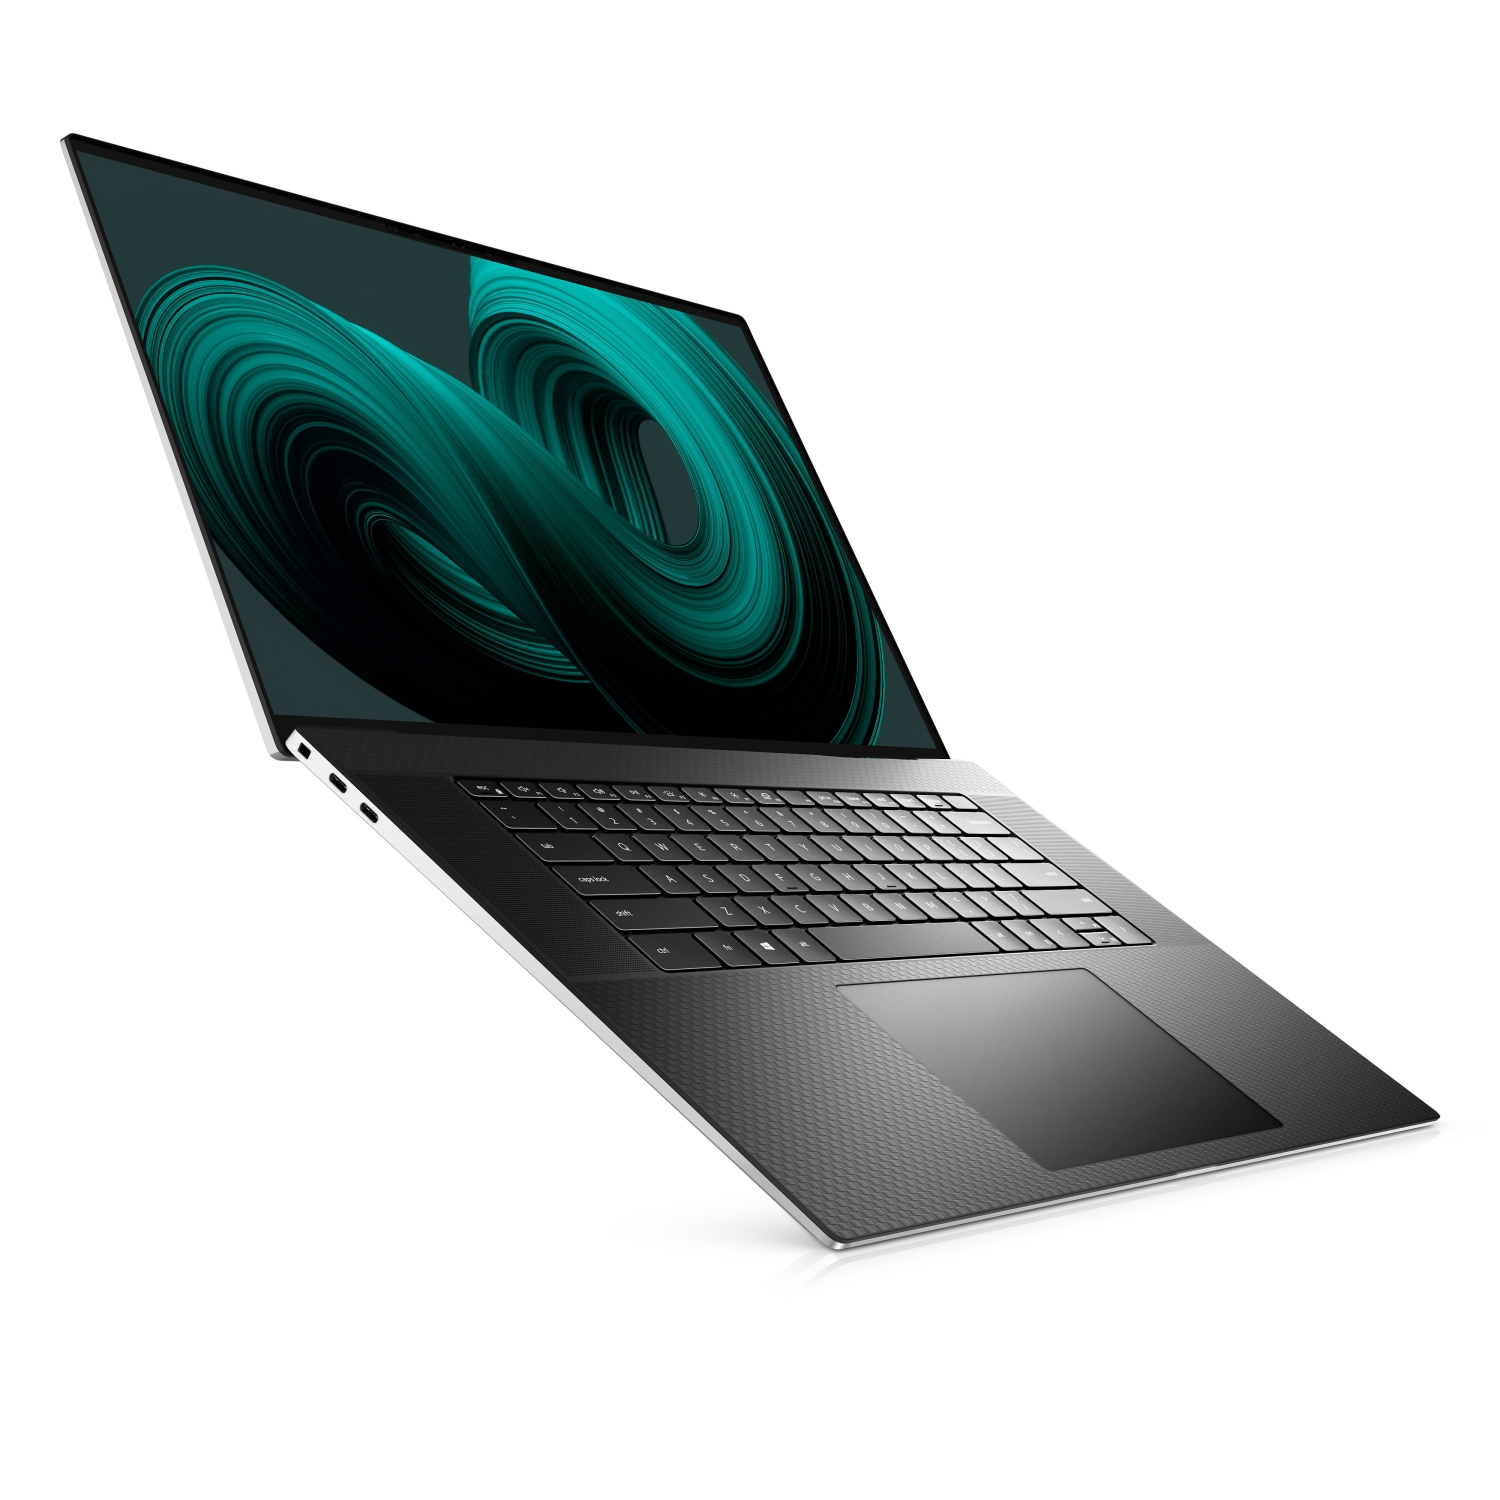 Refurbished (Excellent) - Dell XPS 17 9710 Laptop (2021) | 17" FHD+ | Core i9 - 512GB SSD - 32GB RAM - RTX 3060 | 8 Cores @ 4.9 GHz - 11th Gen CPU Certified Refurbished